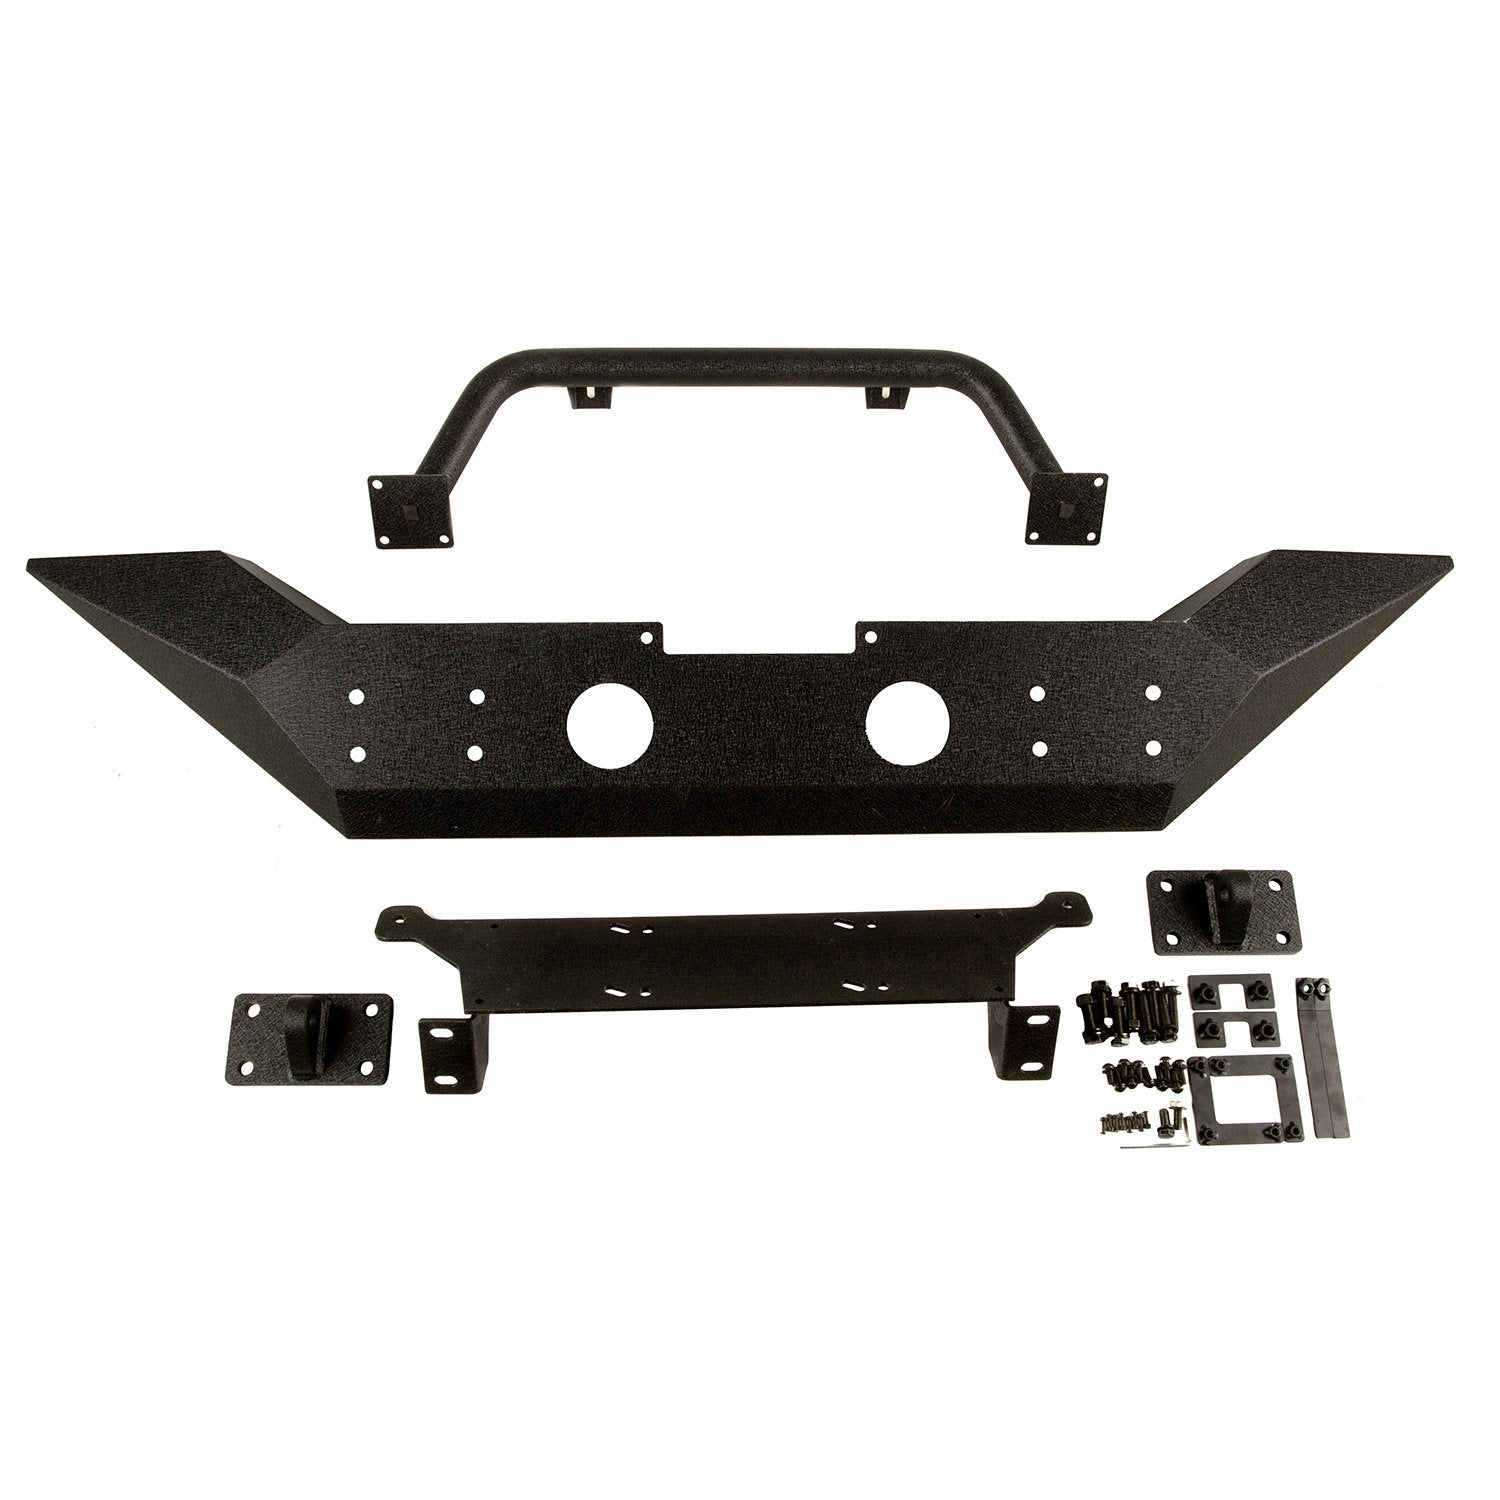 Rugged Ridge 11548.01 Spartan Front Bumper (High Ends/with Overrider)